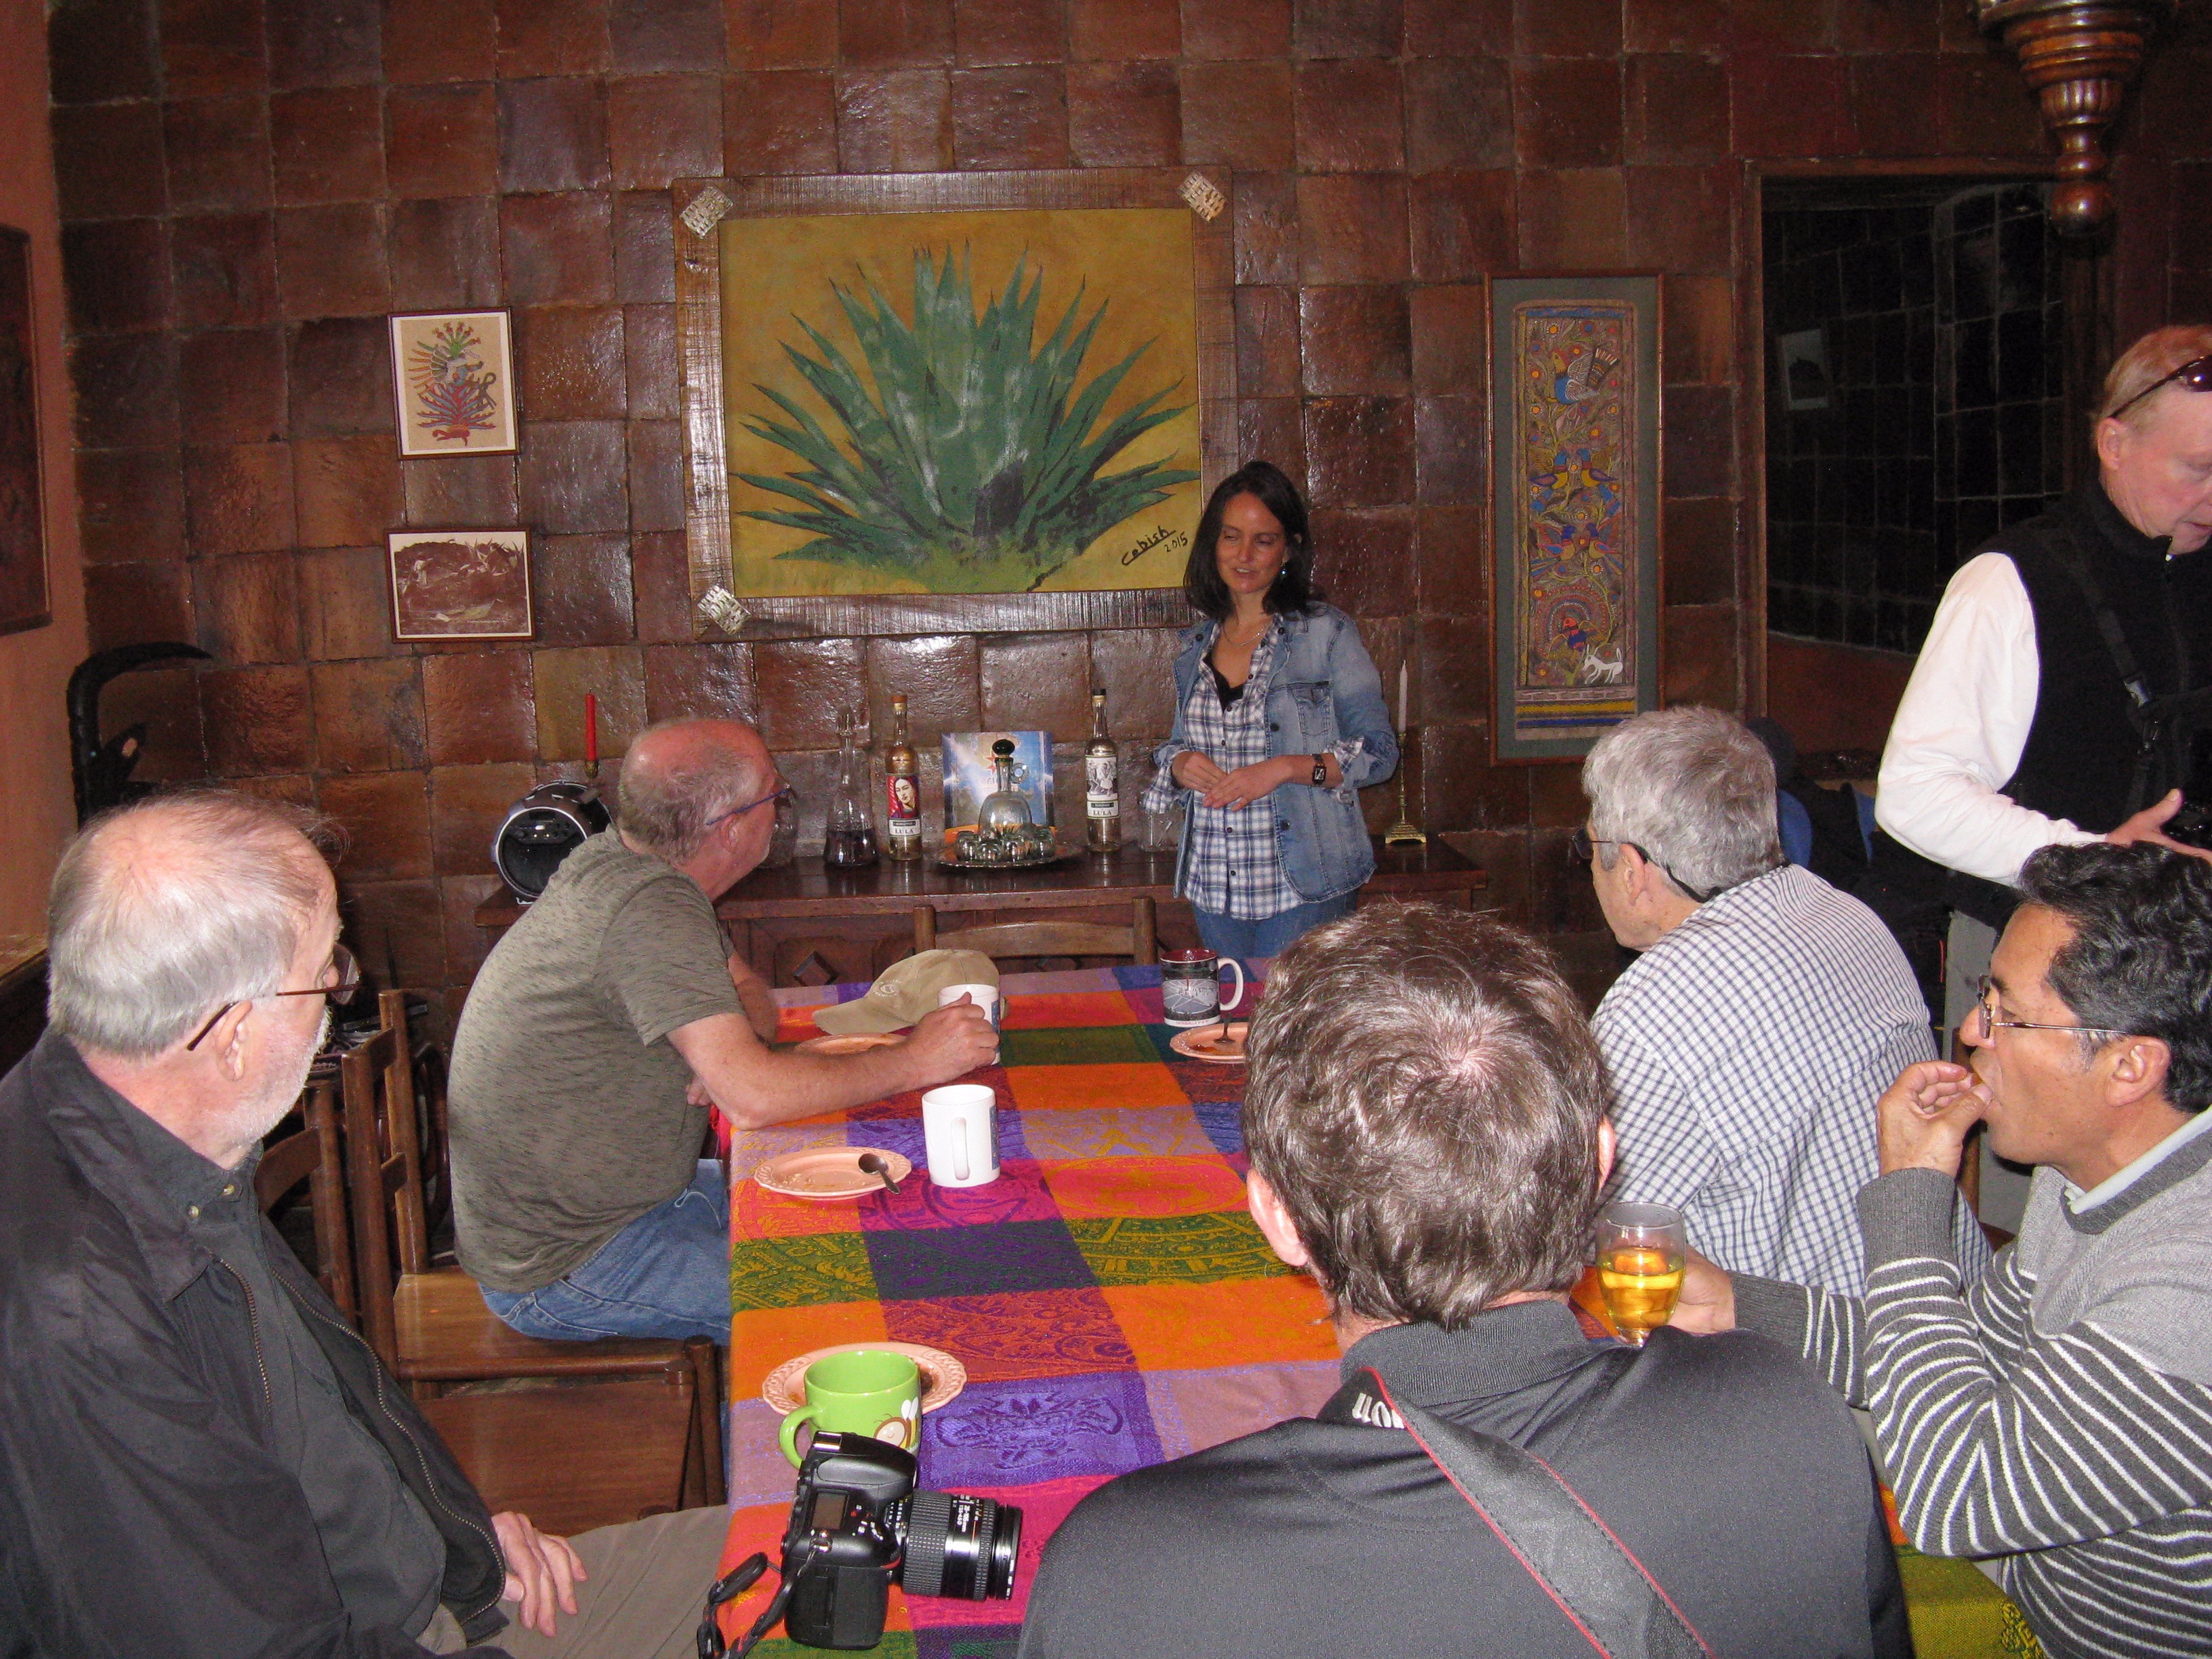 At Hacienda Guachalá, Cristobal presents on geodesy and locally produced foods.